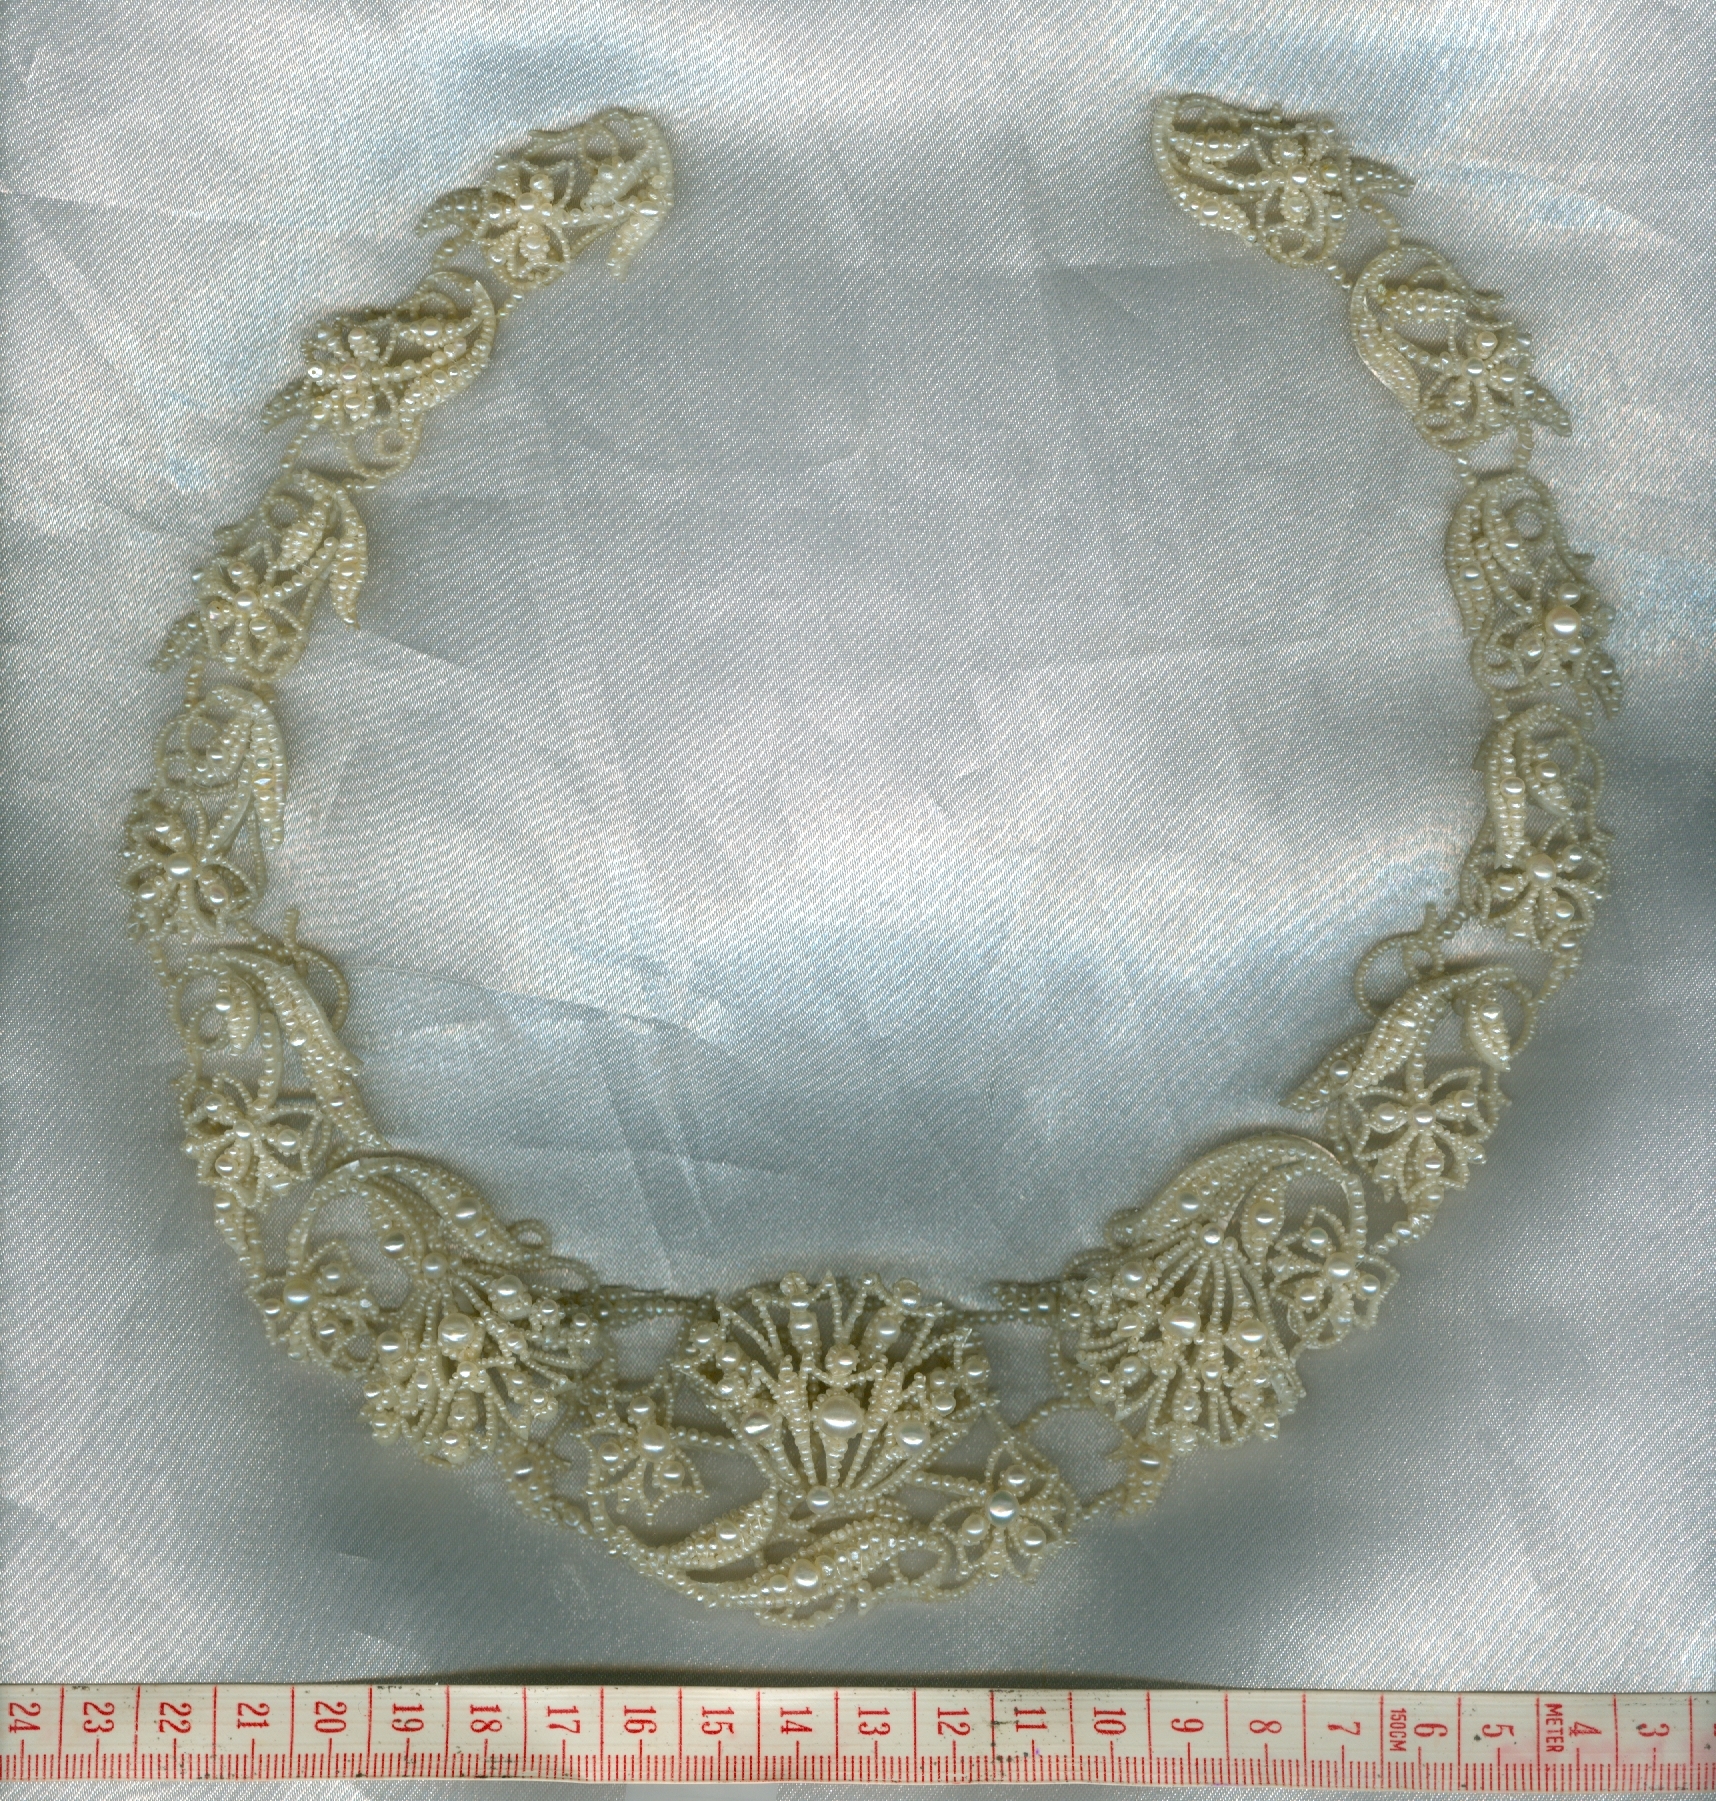 Georgian woven natural seed pearl parure necklace pendant brooches pre Victorian (image 50 of 50)